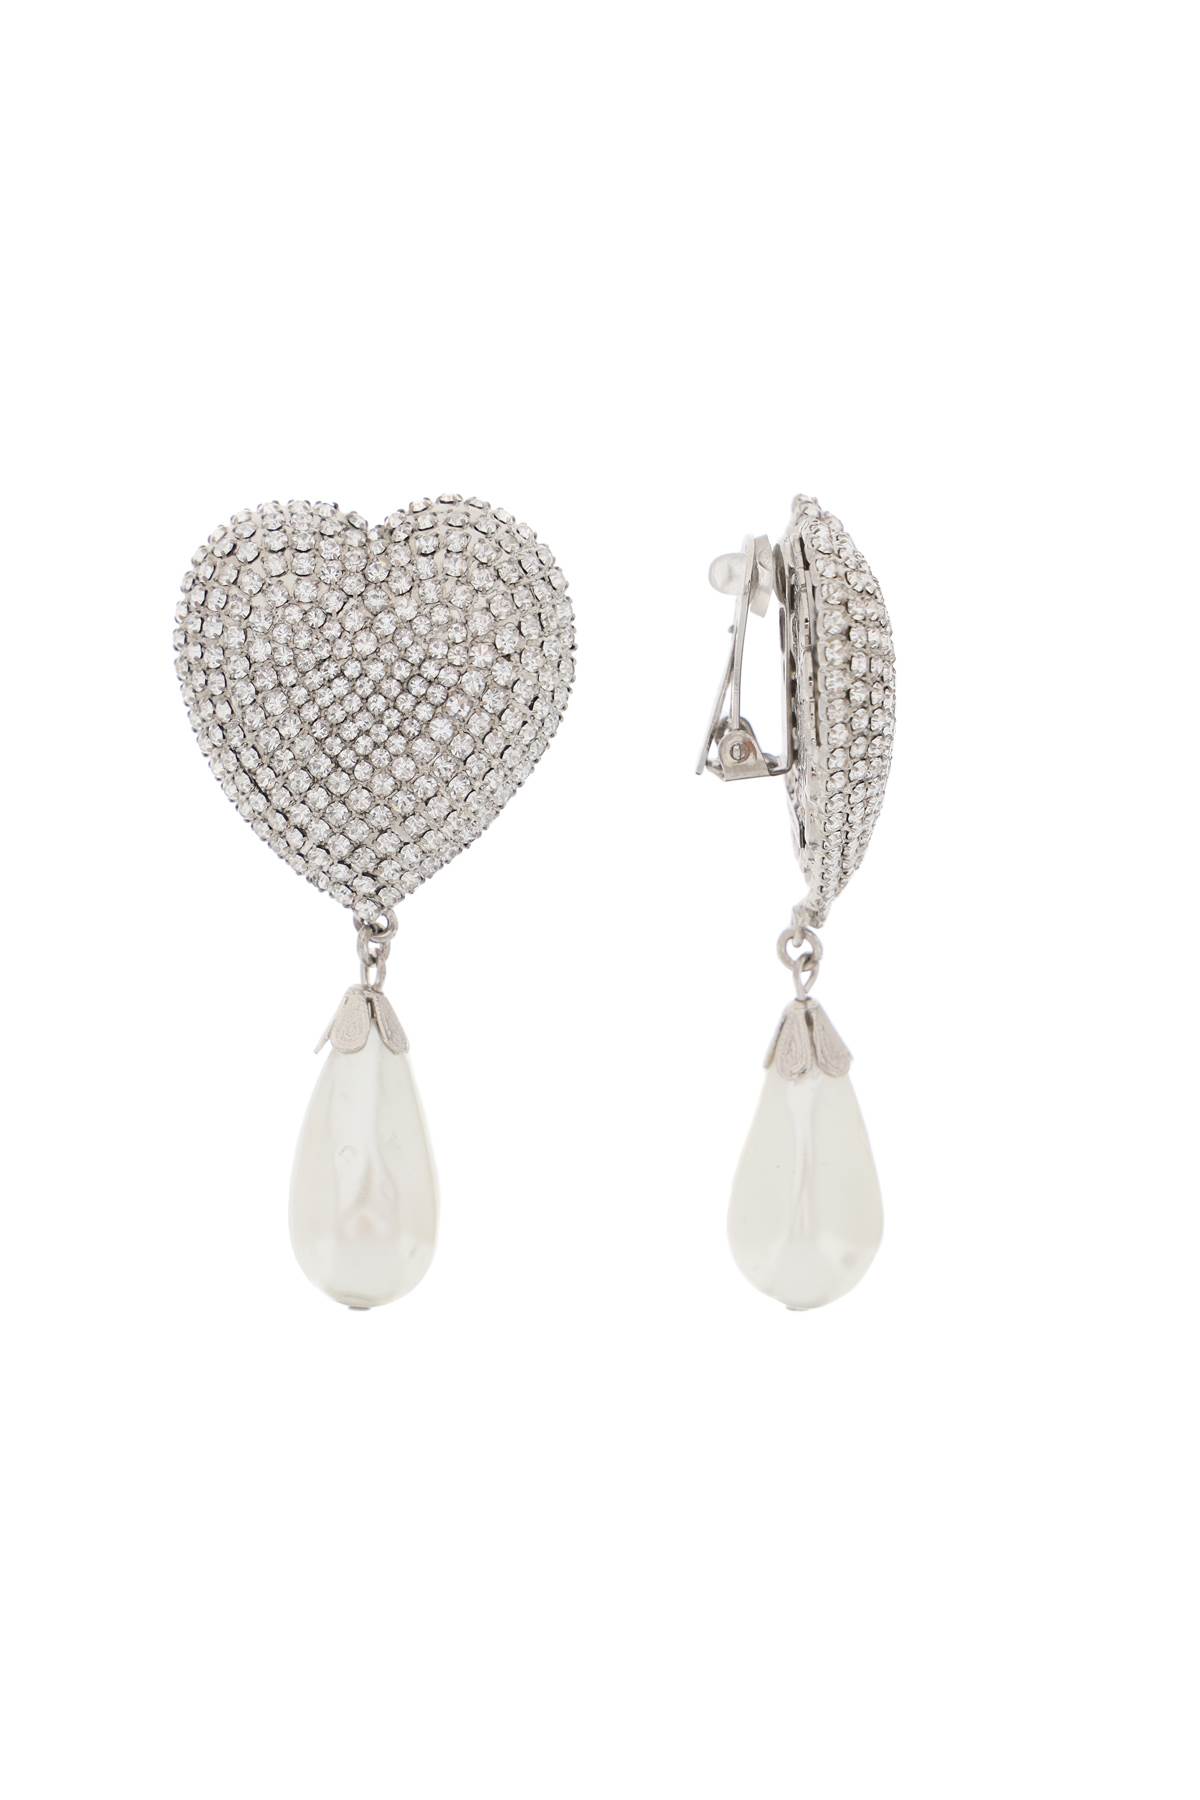 Heart Crystals And Pearl Earrings